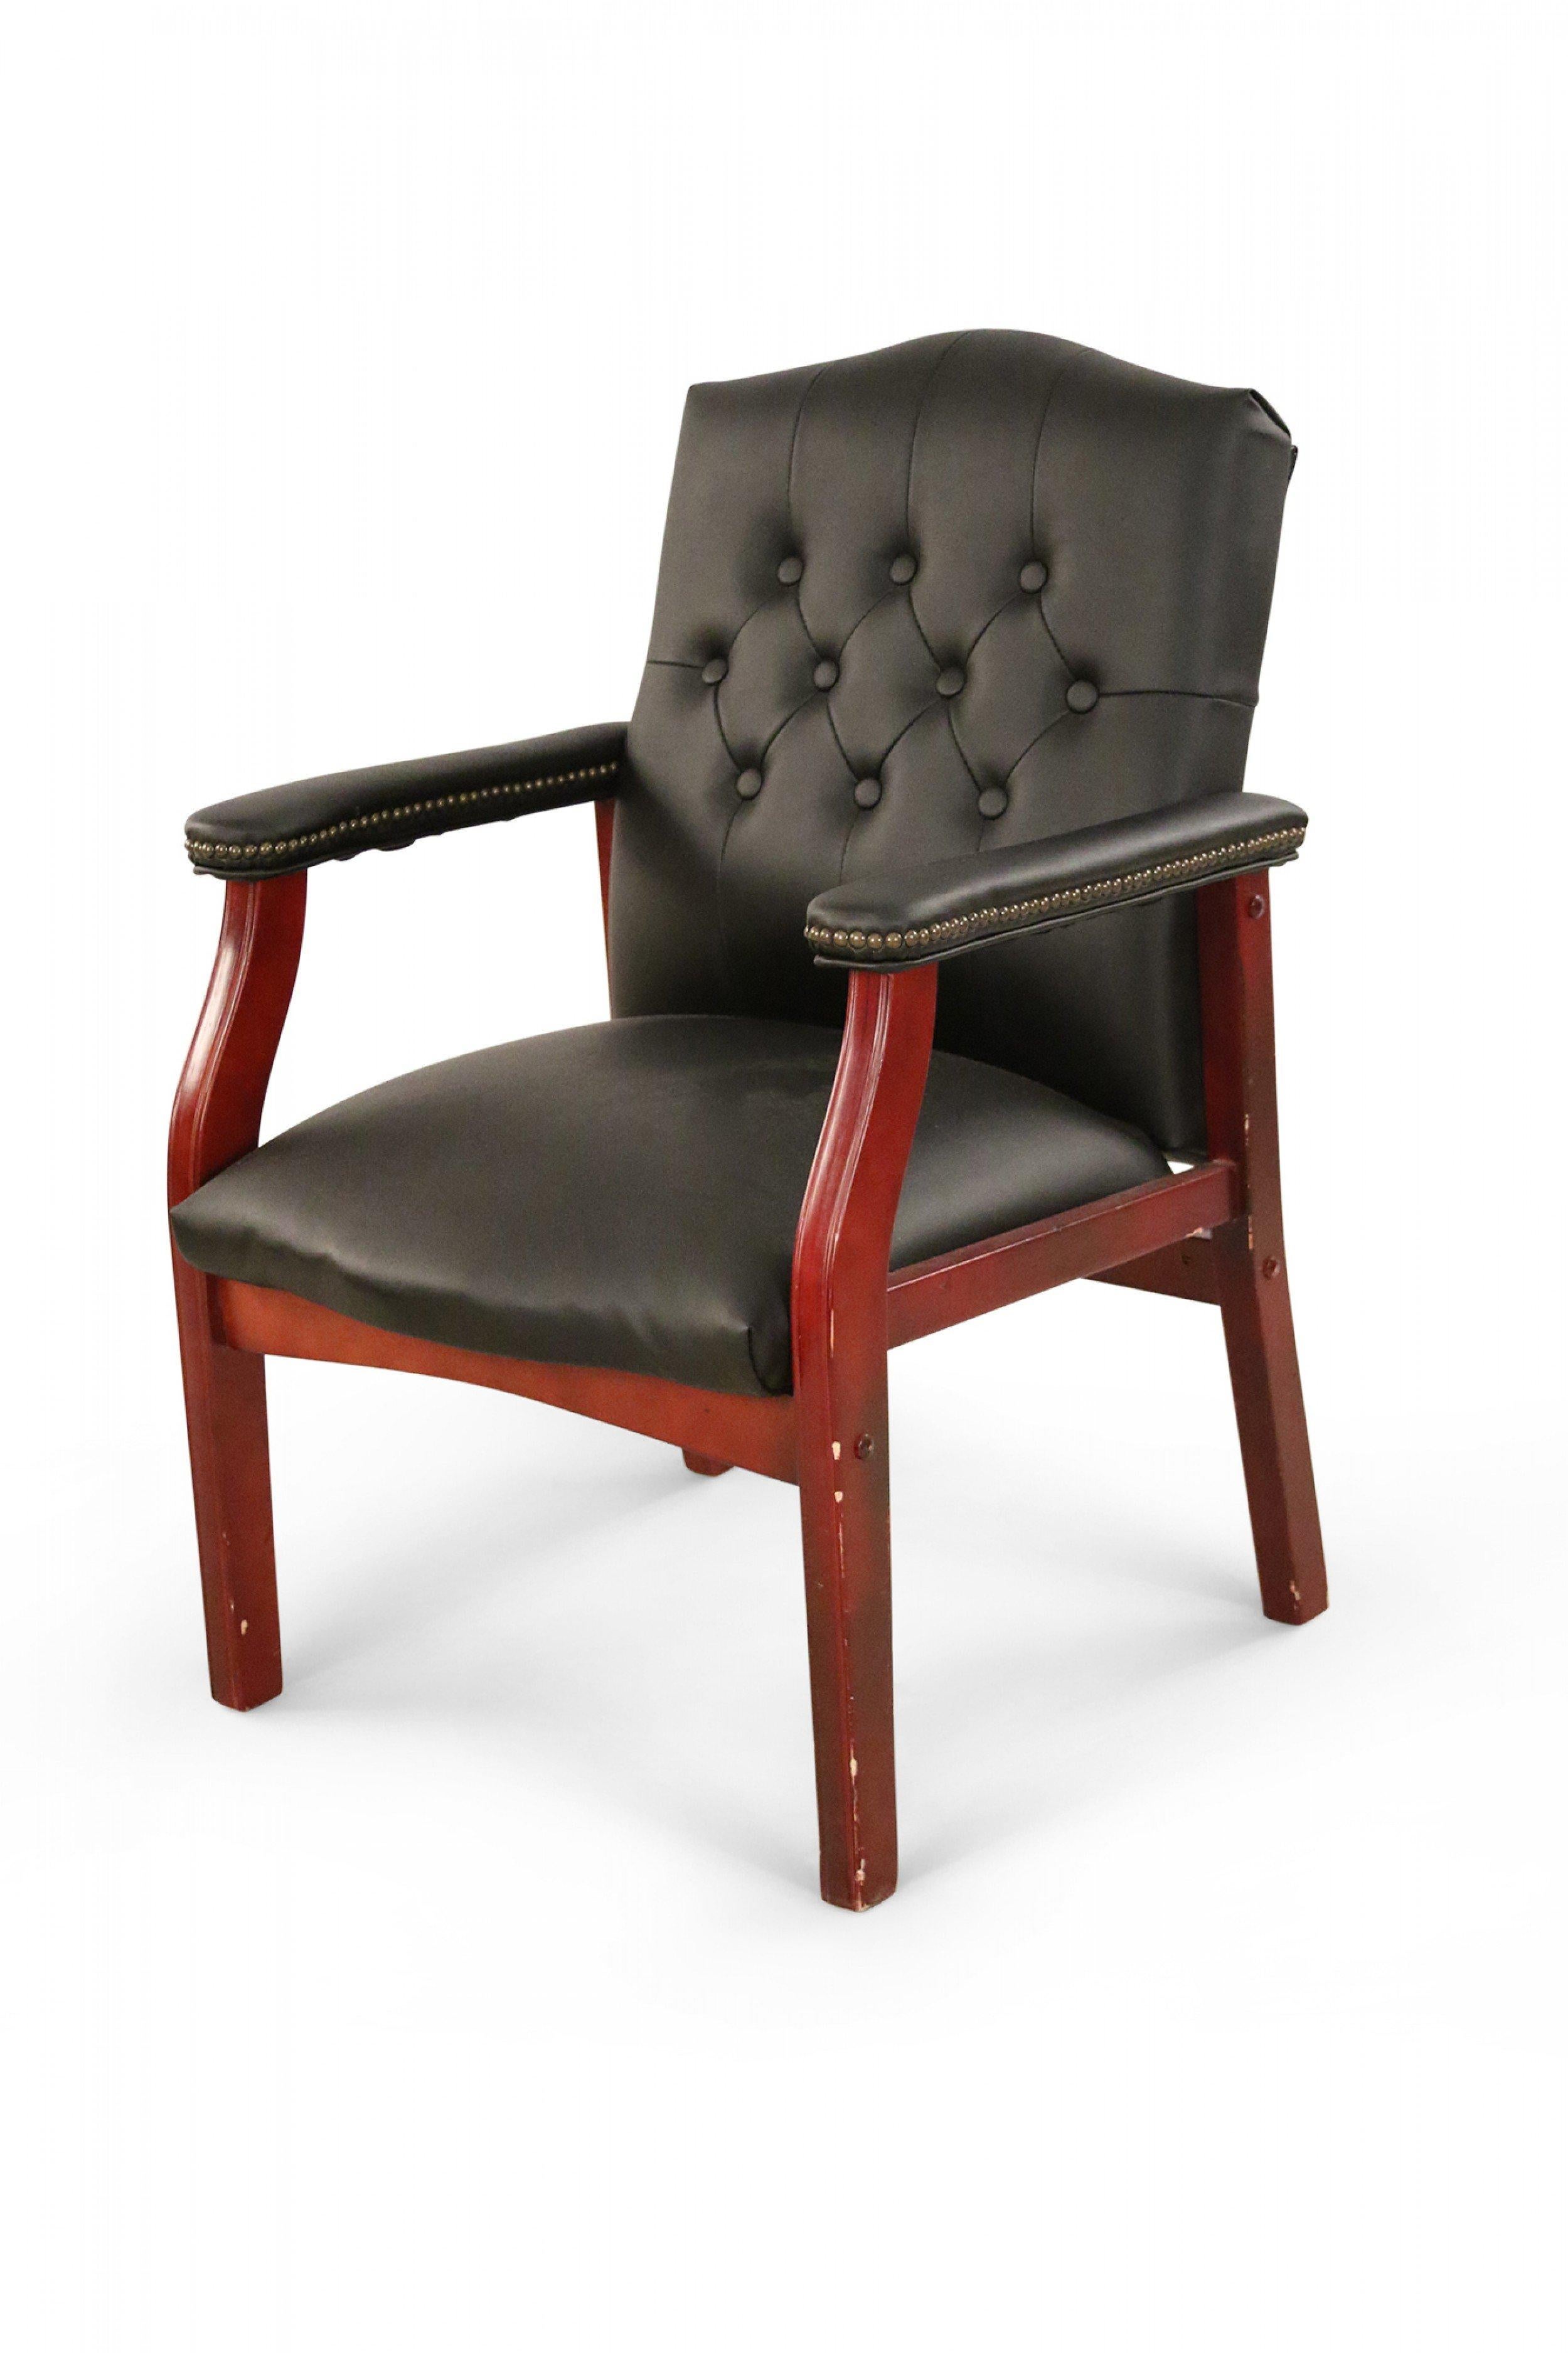 Set of 6 English Georgian-style (modern) black button-tufted leather armchairs with wooden frames and padded arm rests (PRICED AS SET).
 